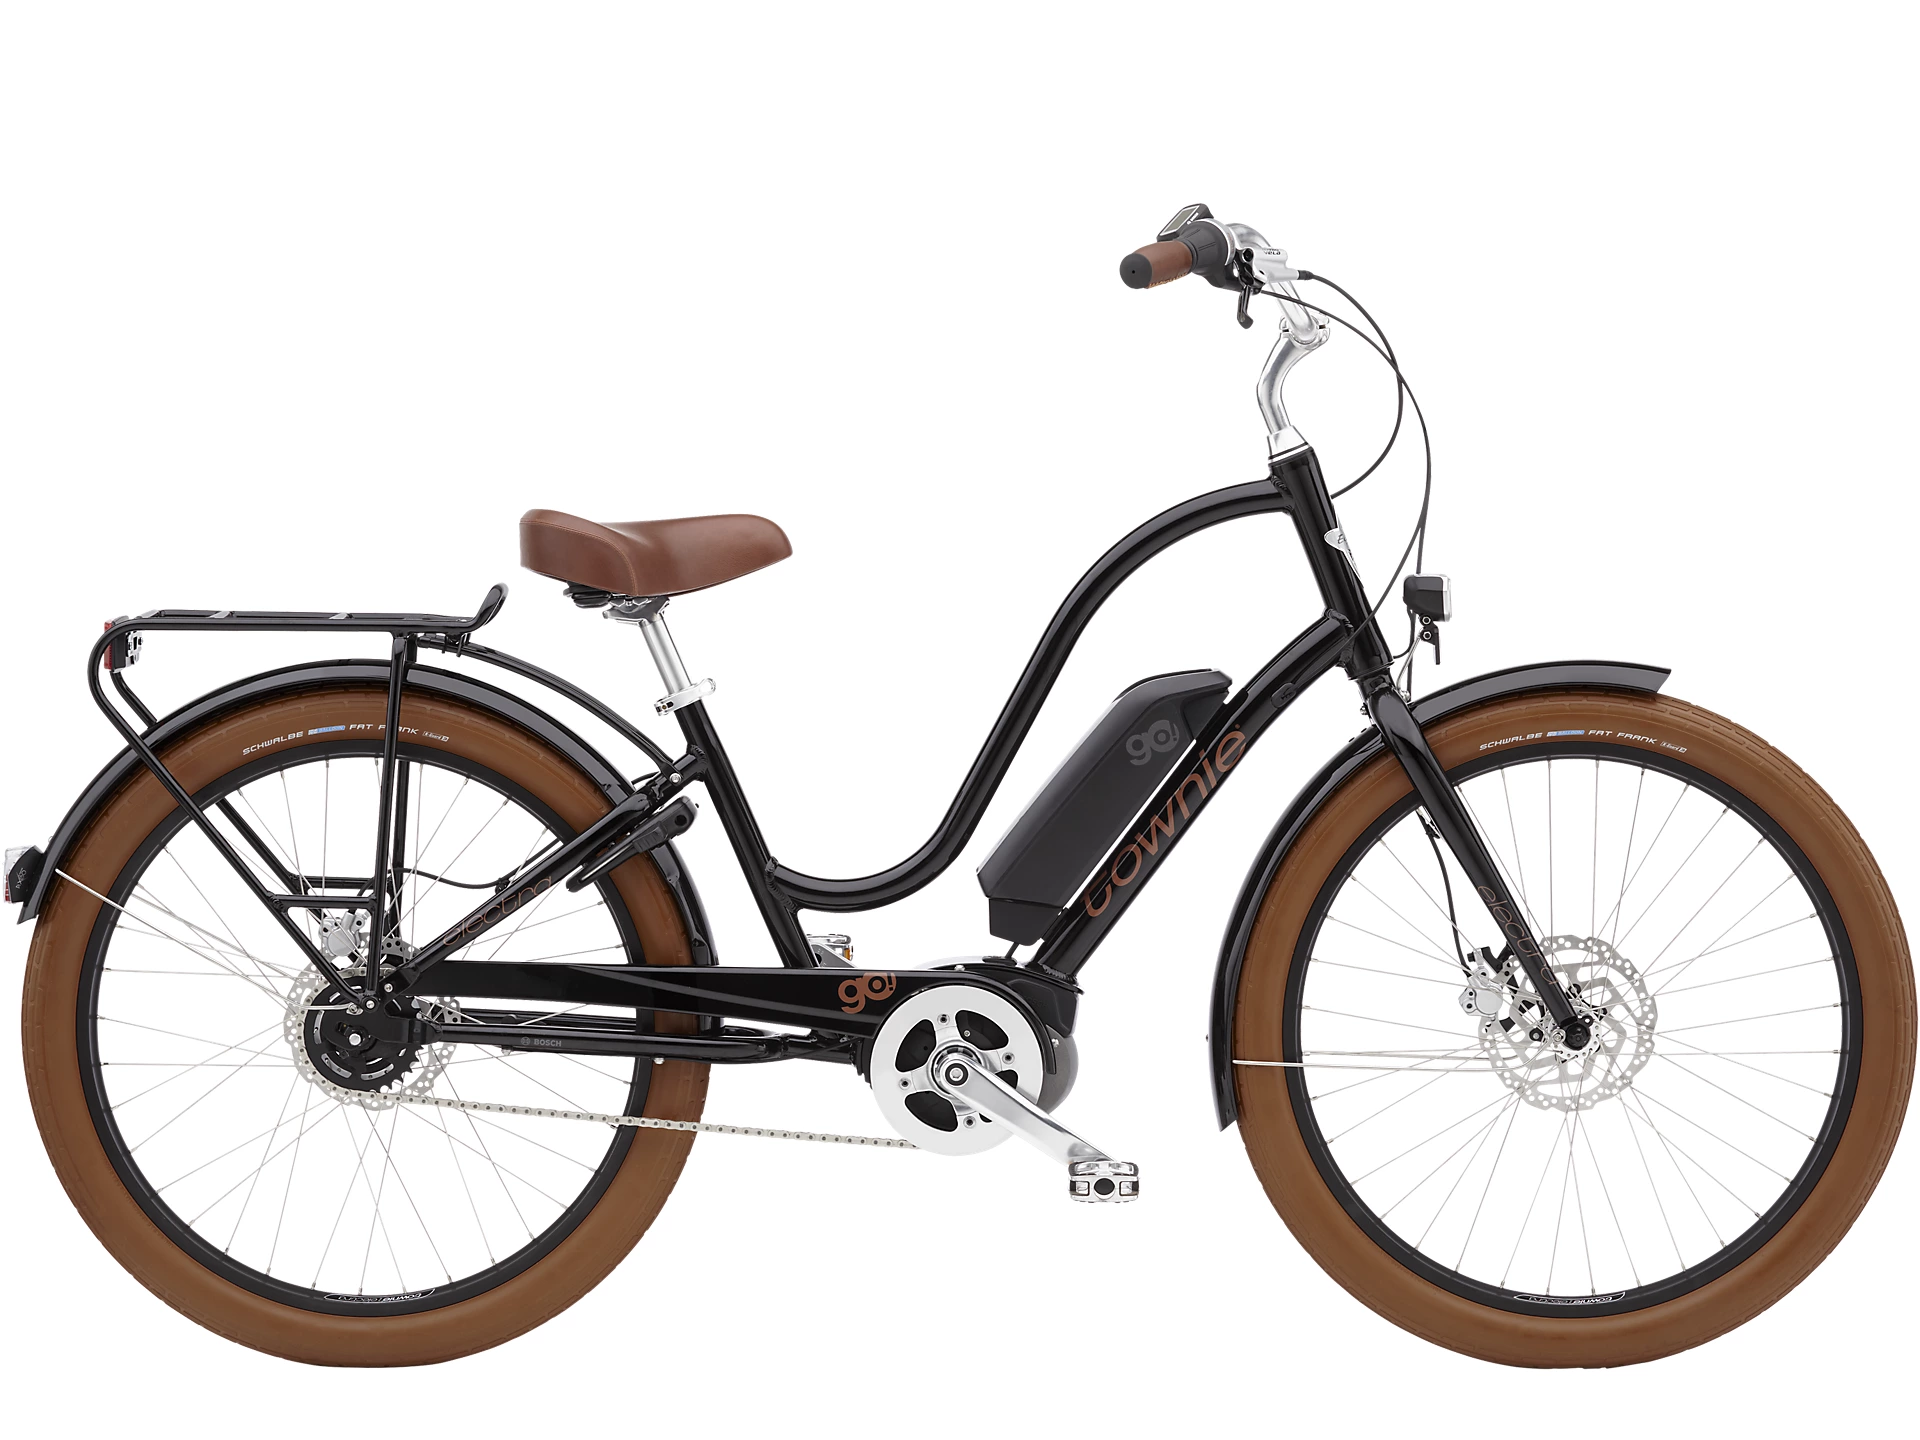 Complete your Idaho adventure with a Townie Go! Electric Bike Rental from The Cycle Haus!